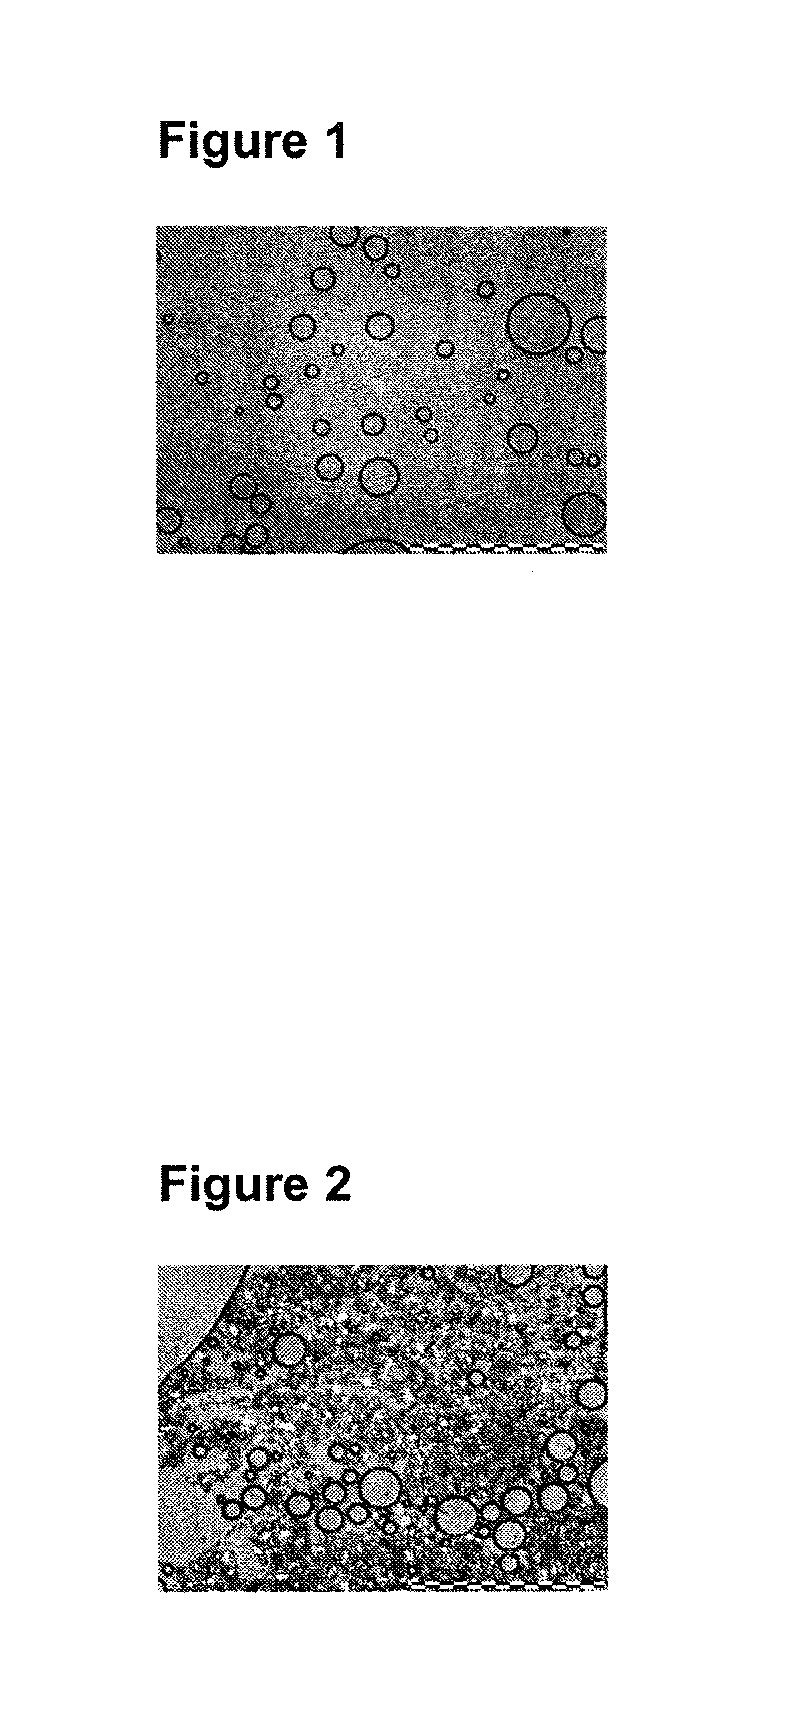 Foamable Compositions and Kits Comprising One or More of a Channel Agent, a Cholinergic Agent, A nitric Oxide Donor and Related Agents and Their Uses